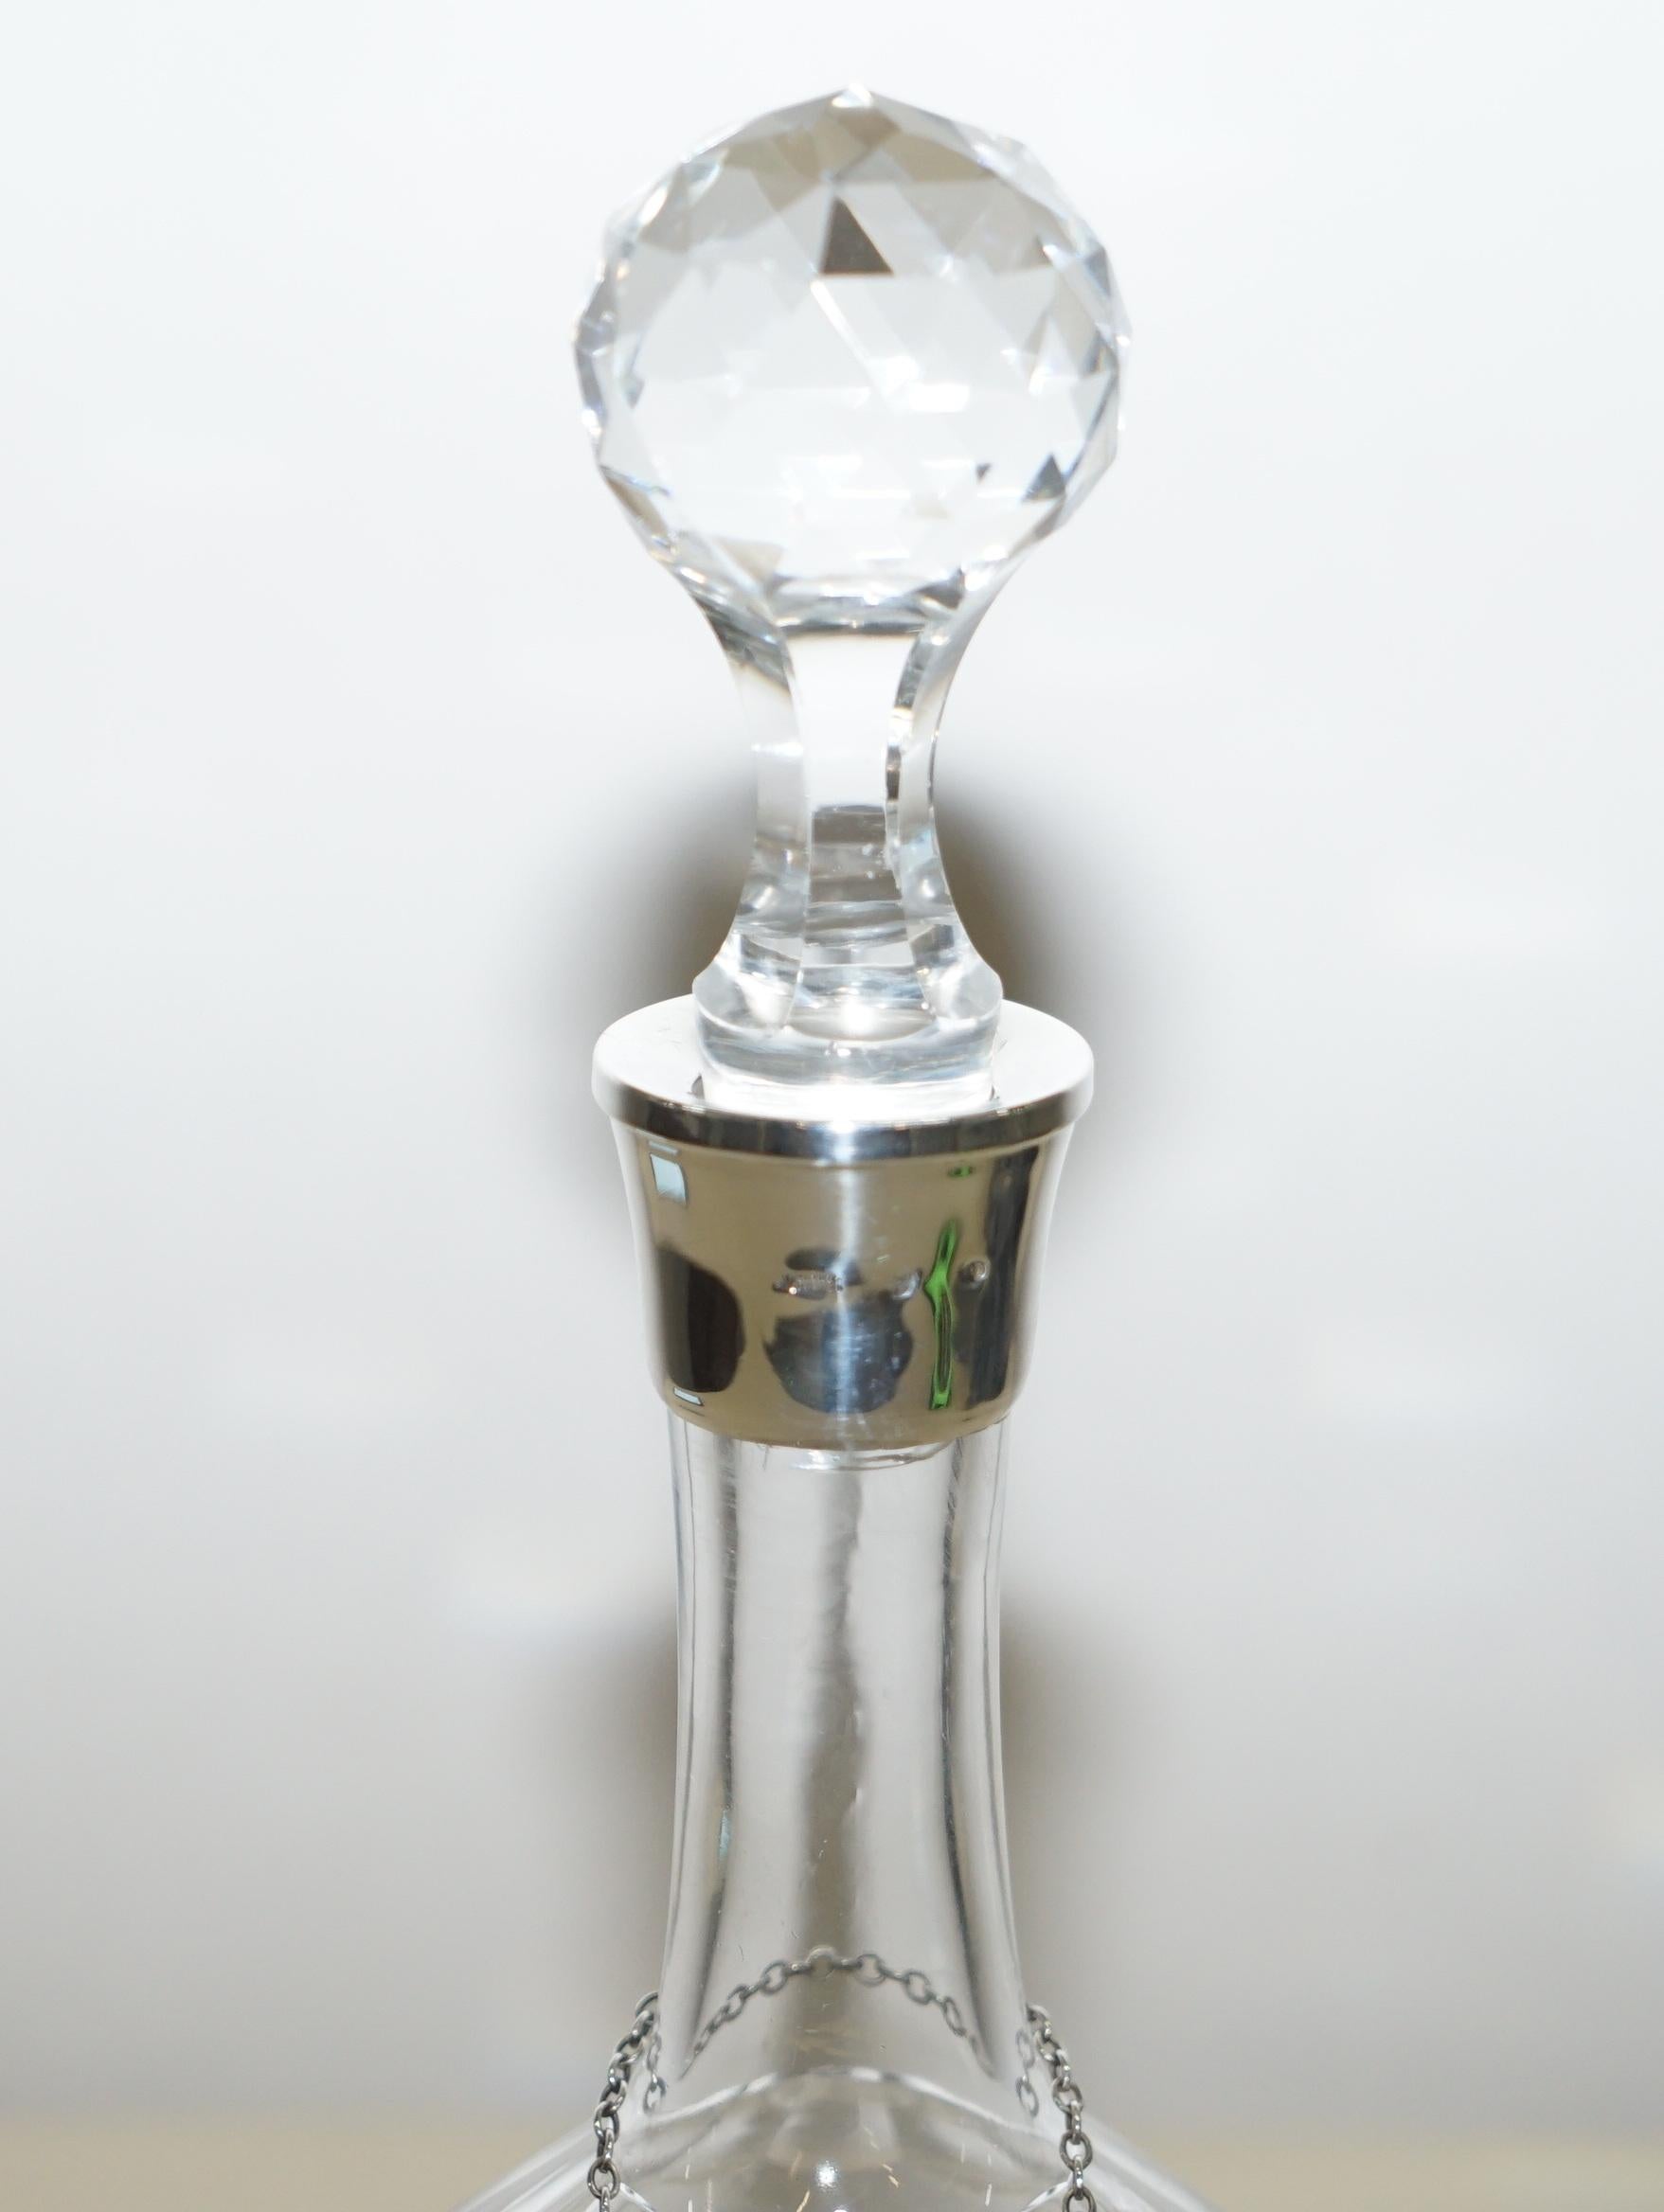 We are delighted to offer for sale this sublime cut glass crystal decanter with sterling silver collar and sterling silver sherry hanging label

A good looking and decorative piece, the collar is hallmarked however its heavily faded, the hanging